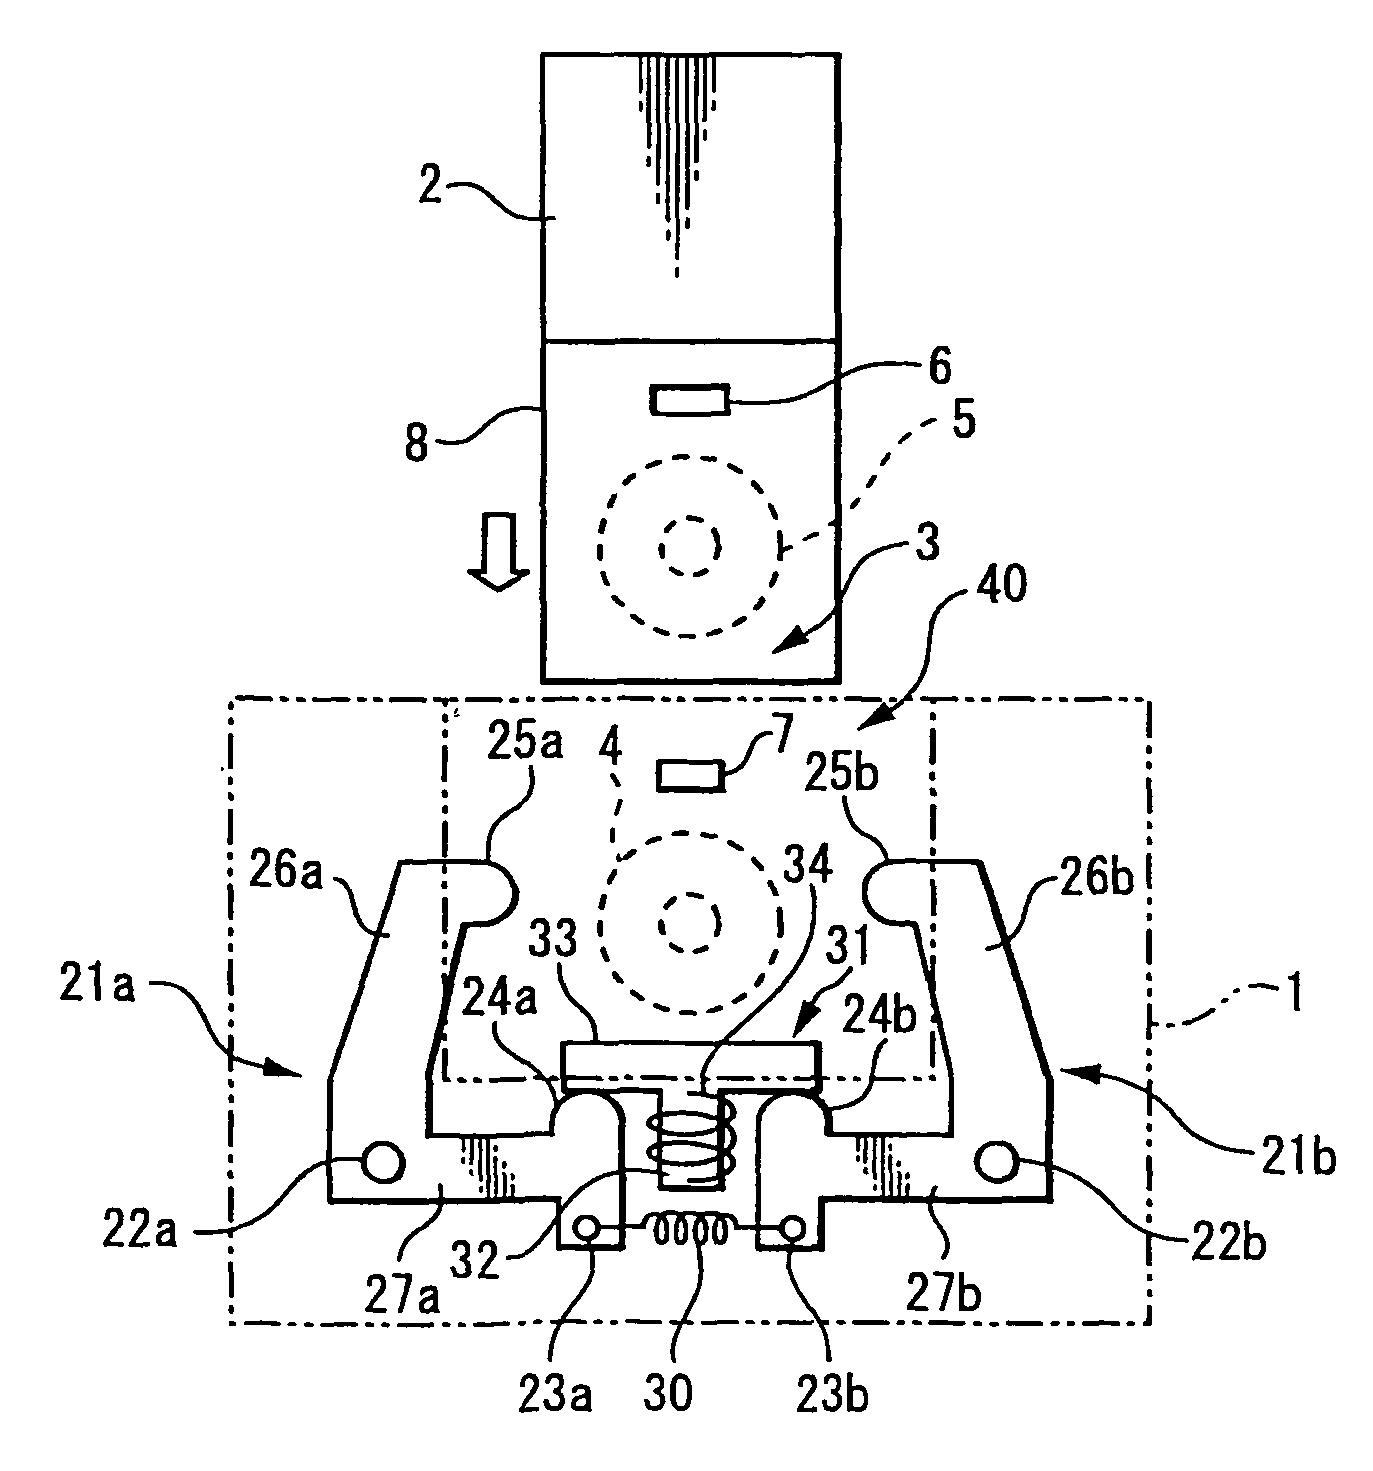 Contactless power transferring apparatus